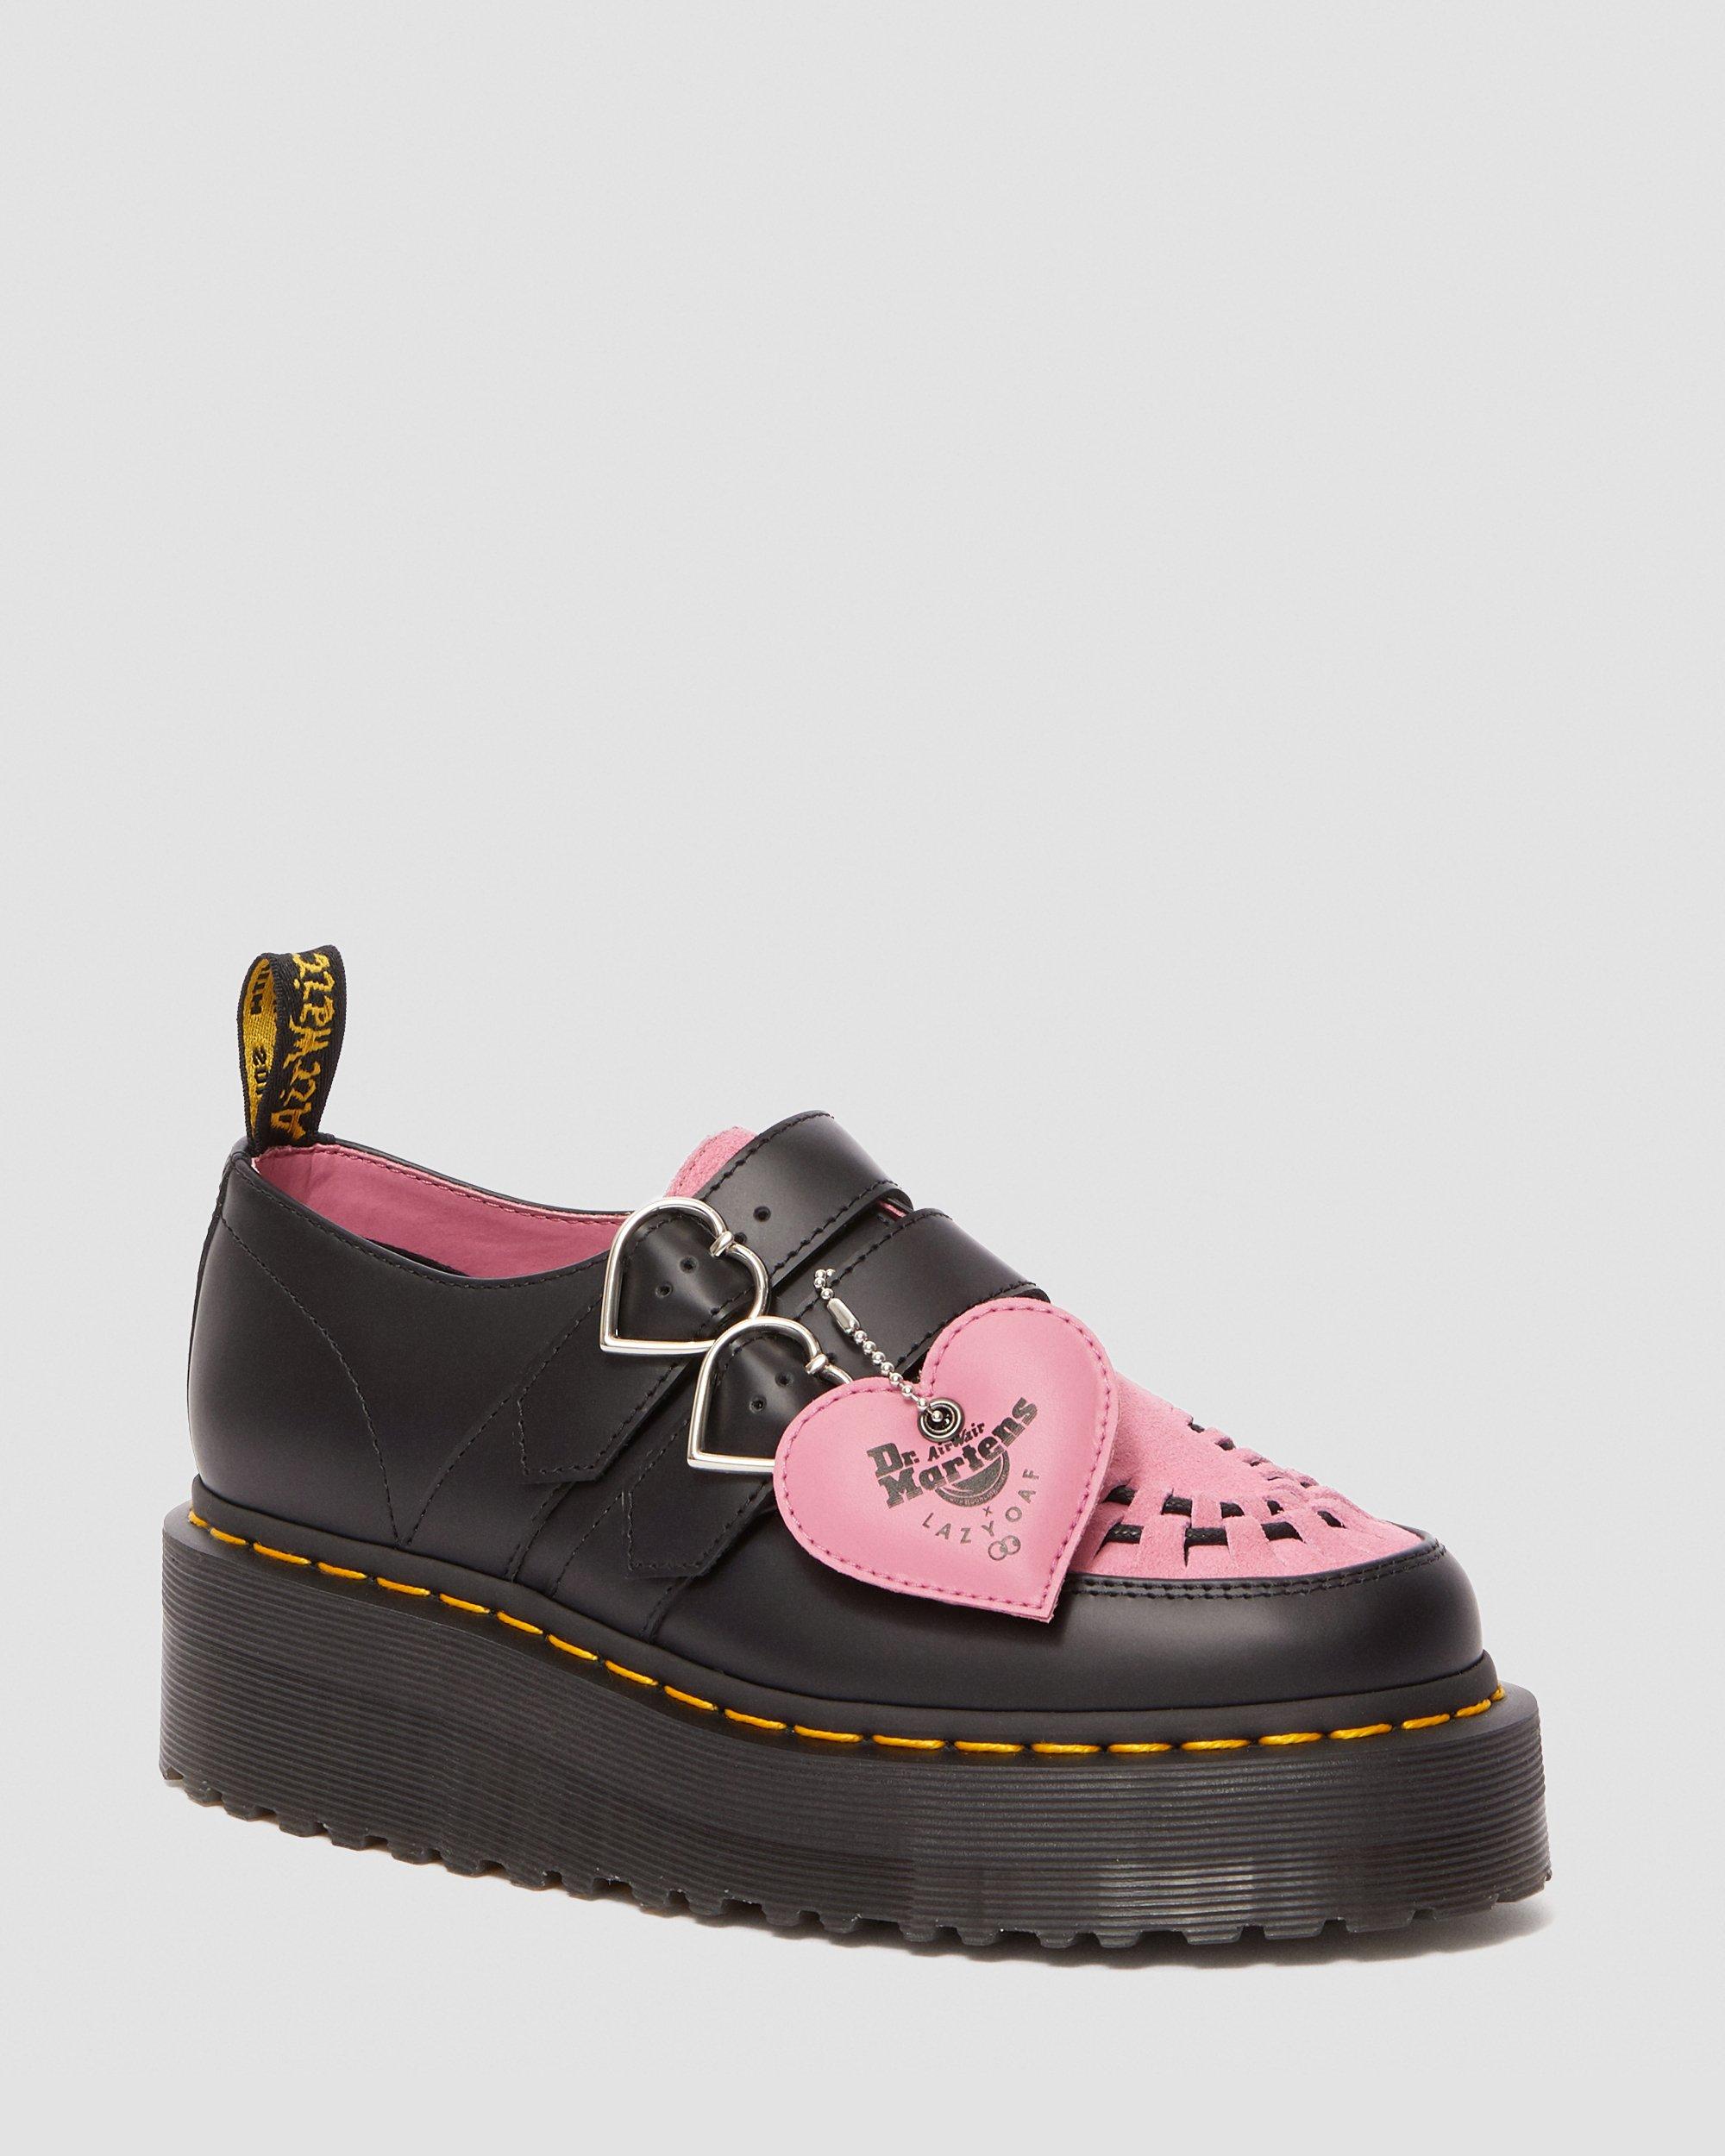 Lazy Oaf Buckle Creeper | Dr. Martens